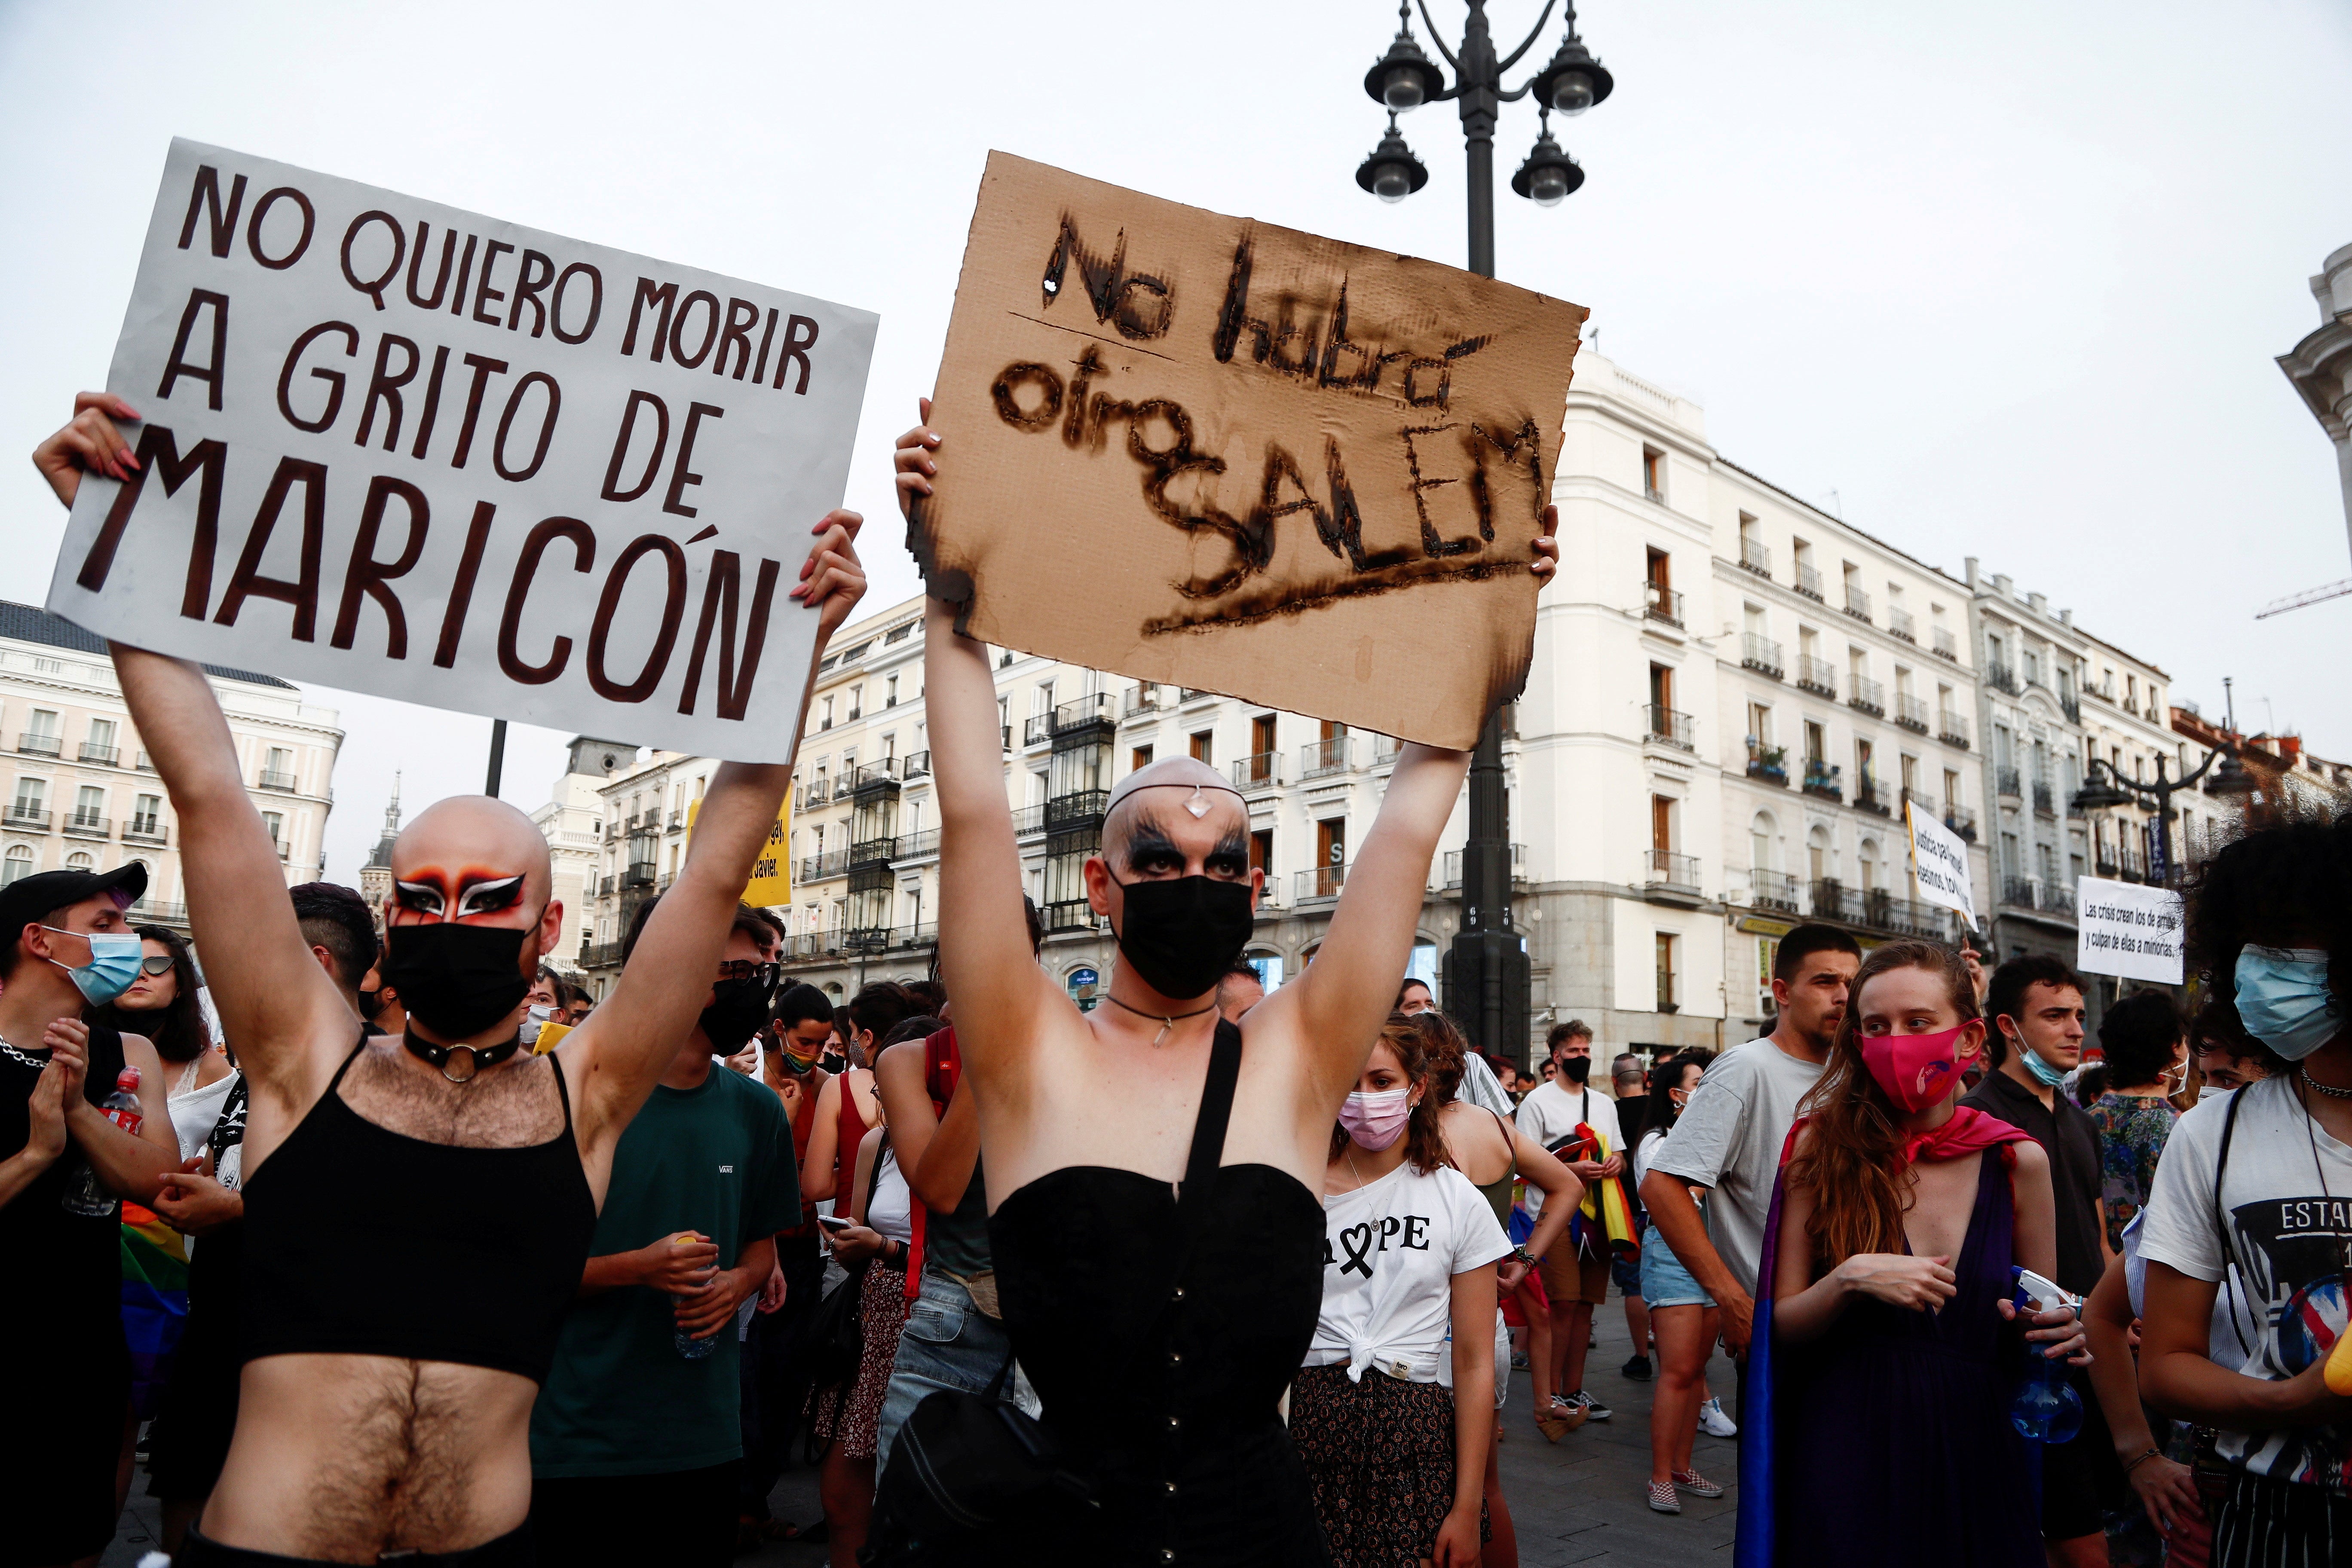 LGBT activists protest against homophobic crimes in Madrid in July. The signs read “I don’t want to die while being called ‘f****t’” and “there will not be another Salem”